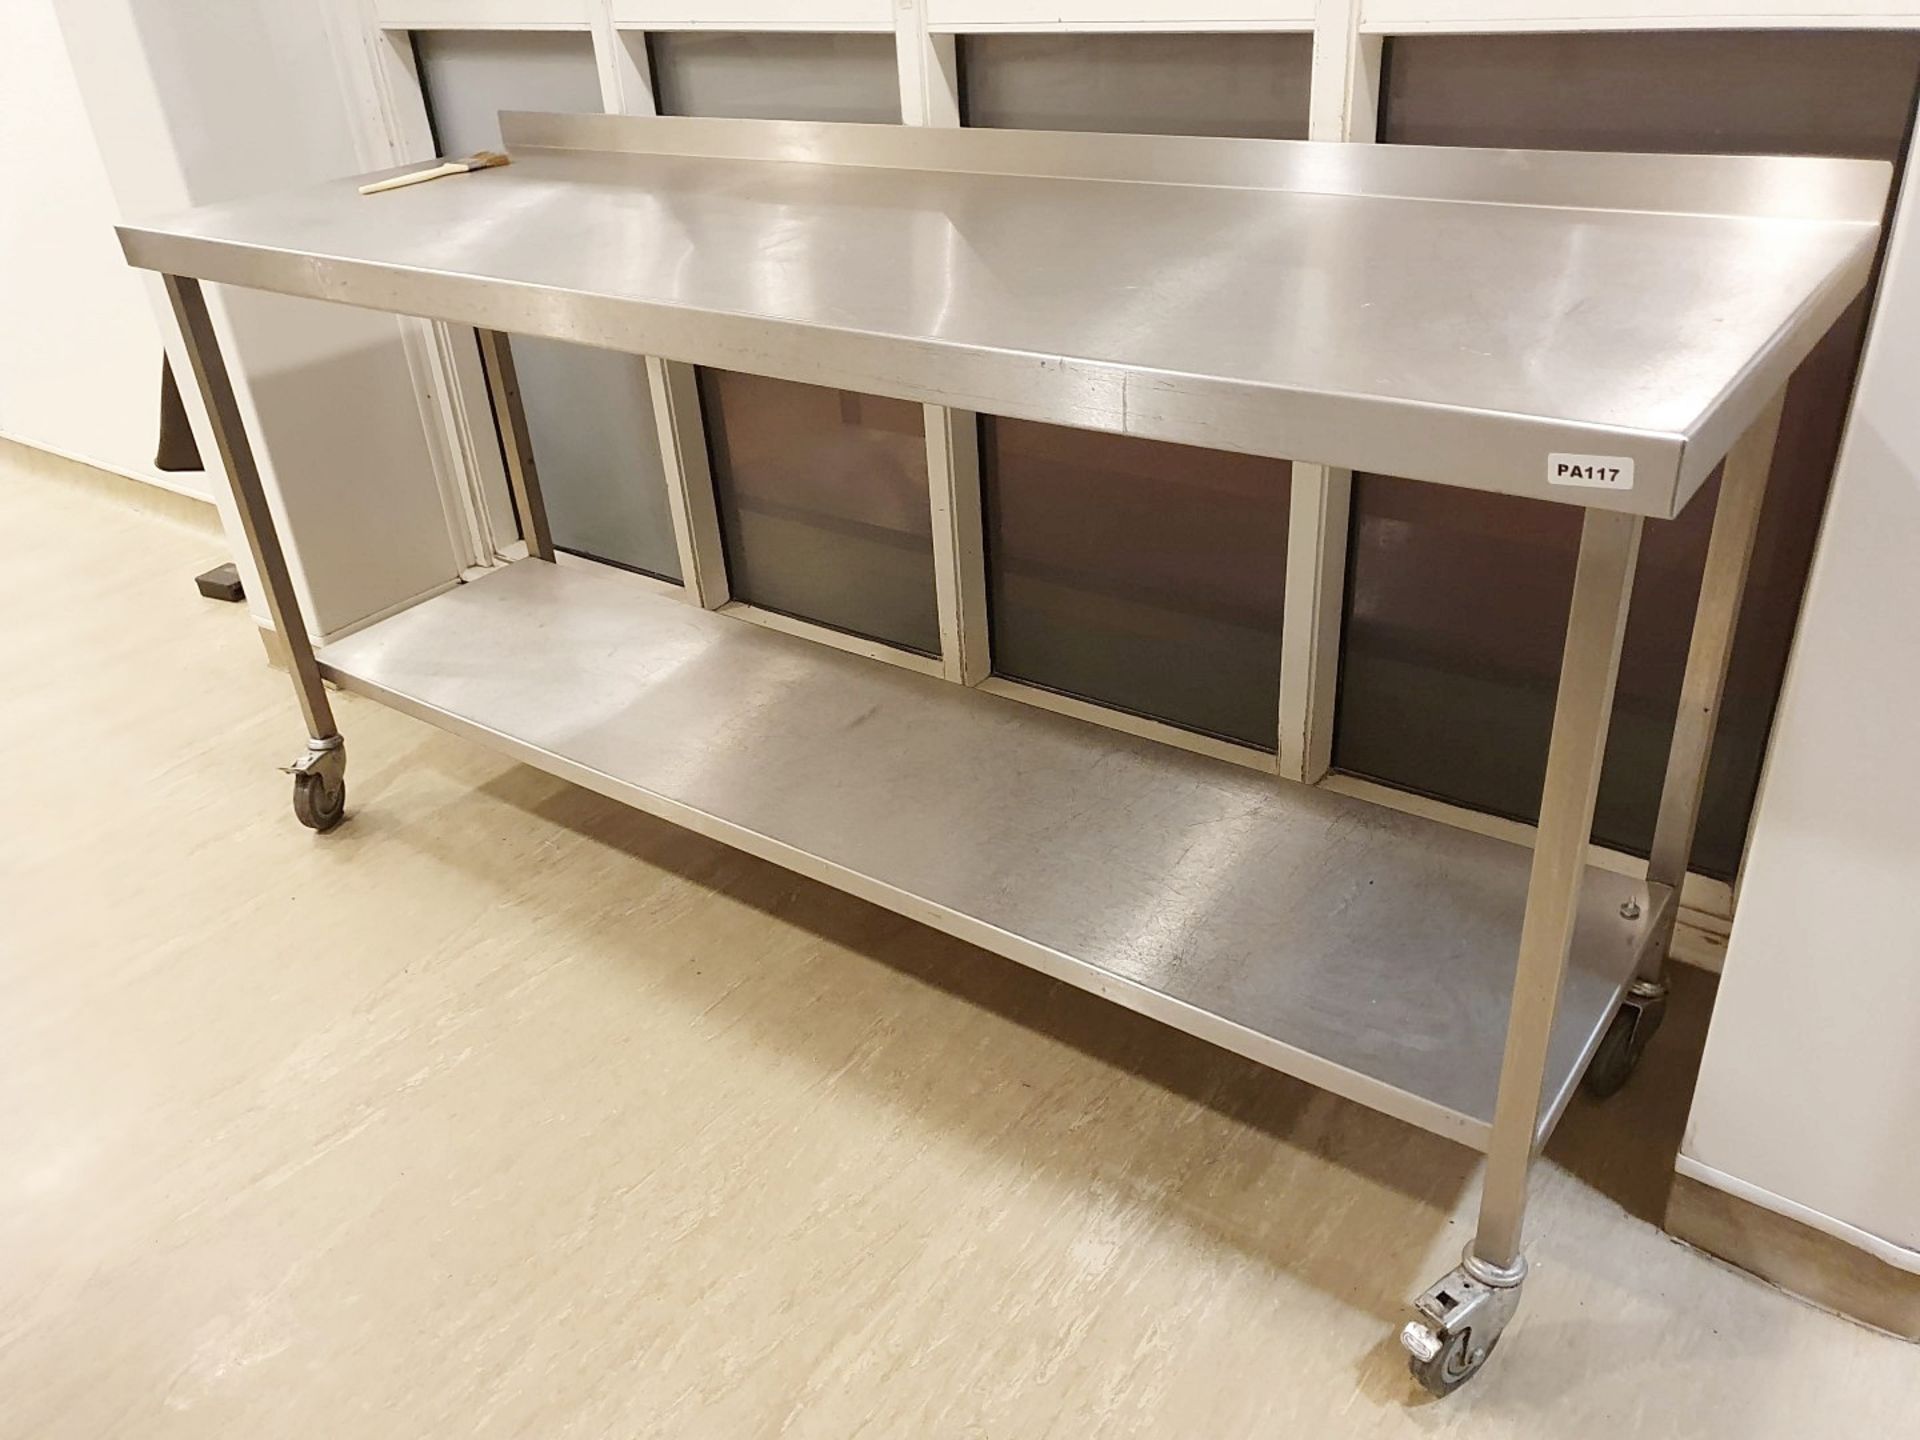 1 x Stainless Steel Preparation Bench With Upstand, Undershelf and Castor Wheels - Ref PA117 - H87 x